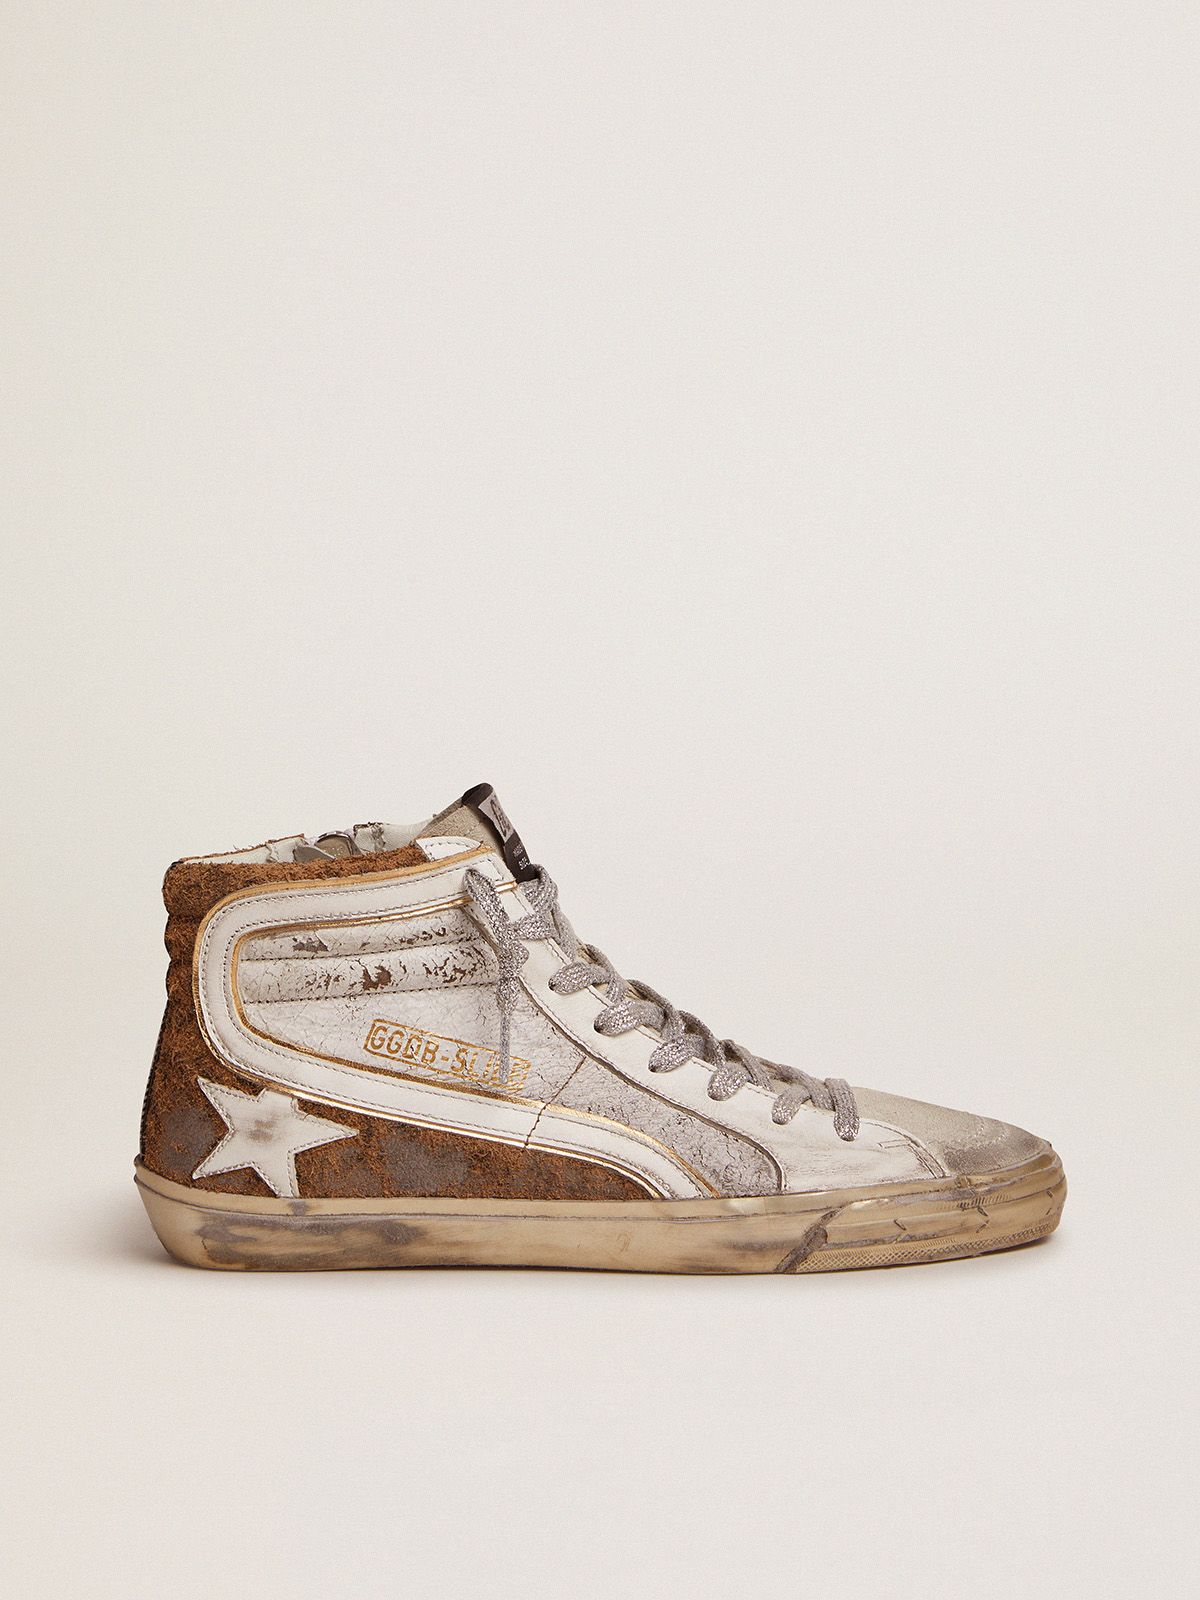 golden goose crackle suede Slide in sneakers leopard-print leather and